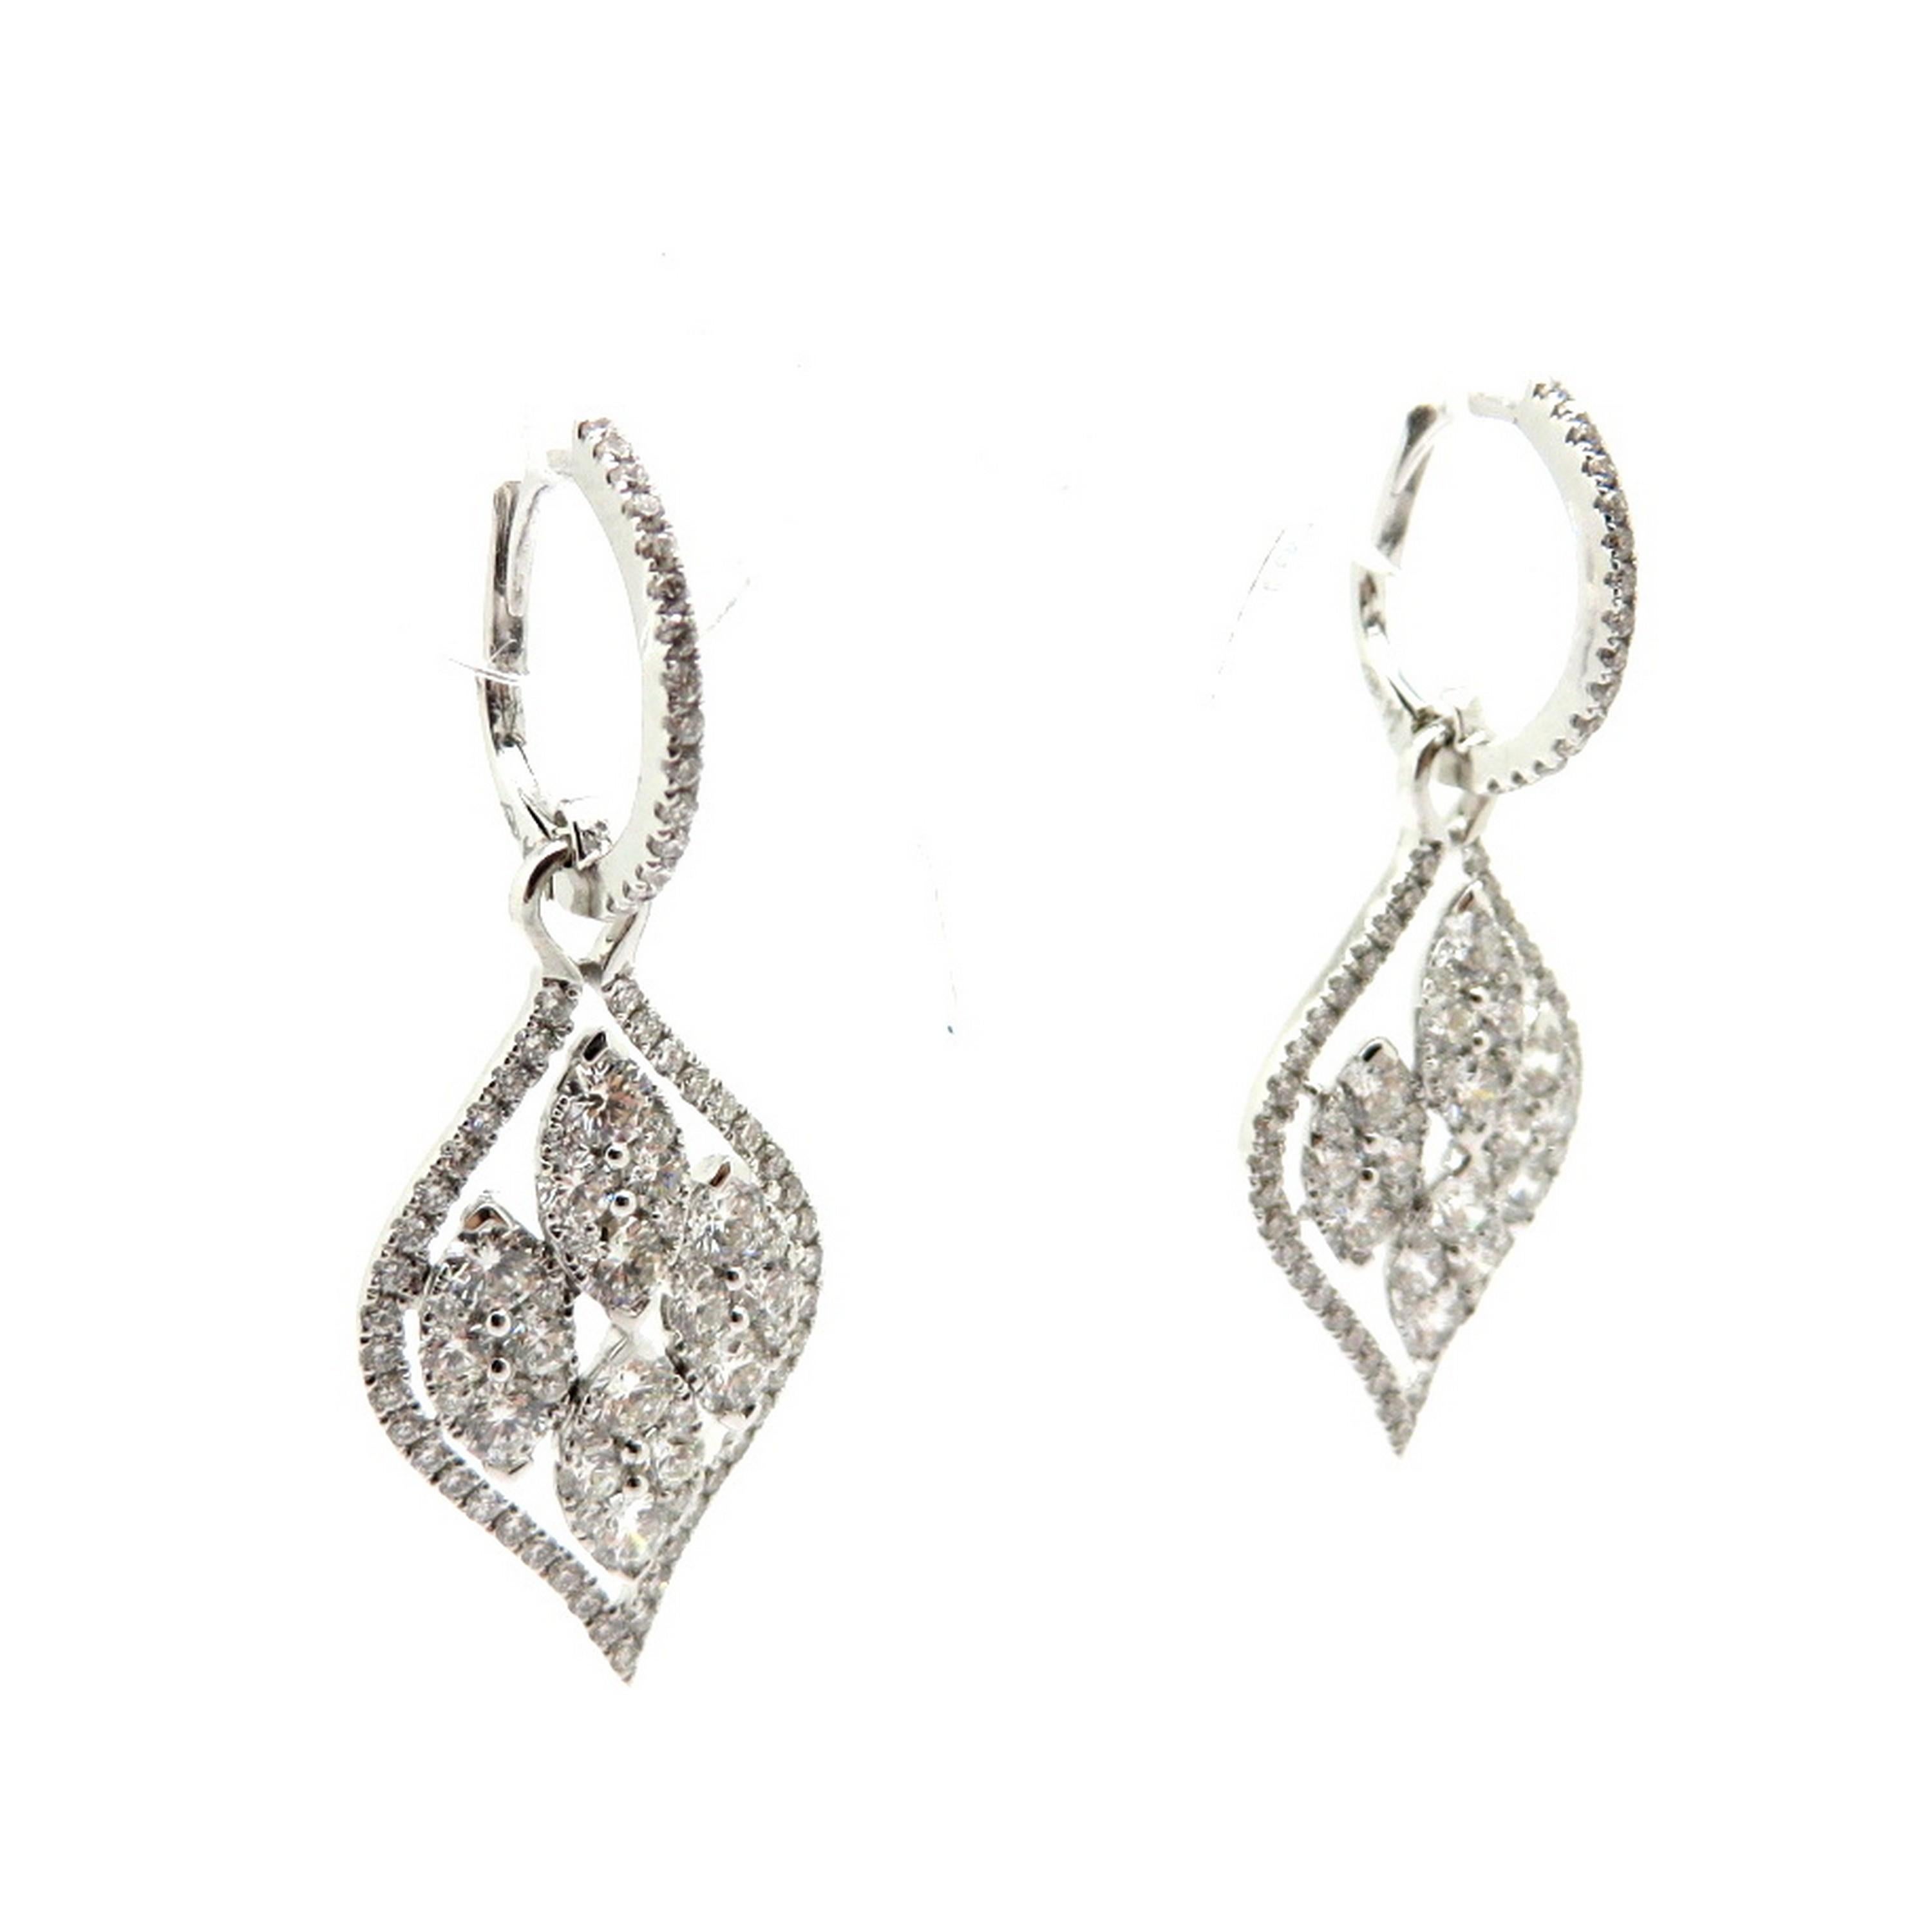 Estate 18K white gold round diamond dangle earrings. Displaying 176 round brilliant cut diamonds, micro prong set, with various measurements, weighing a combined total of approximately 2.97 carats. Diamond grading: color grade: G – H. Clarity grade: